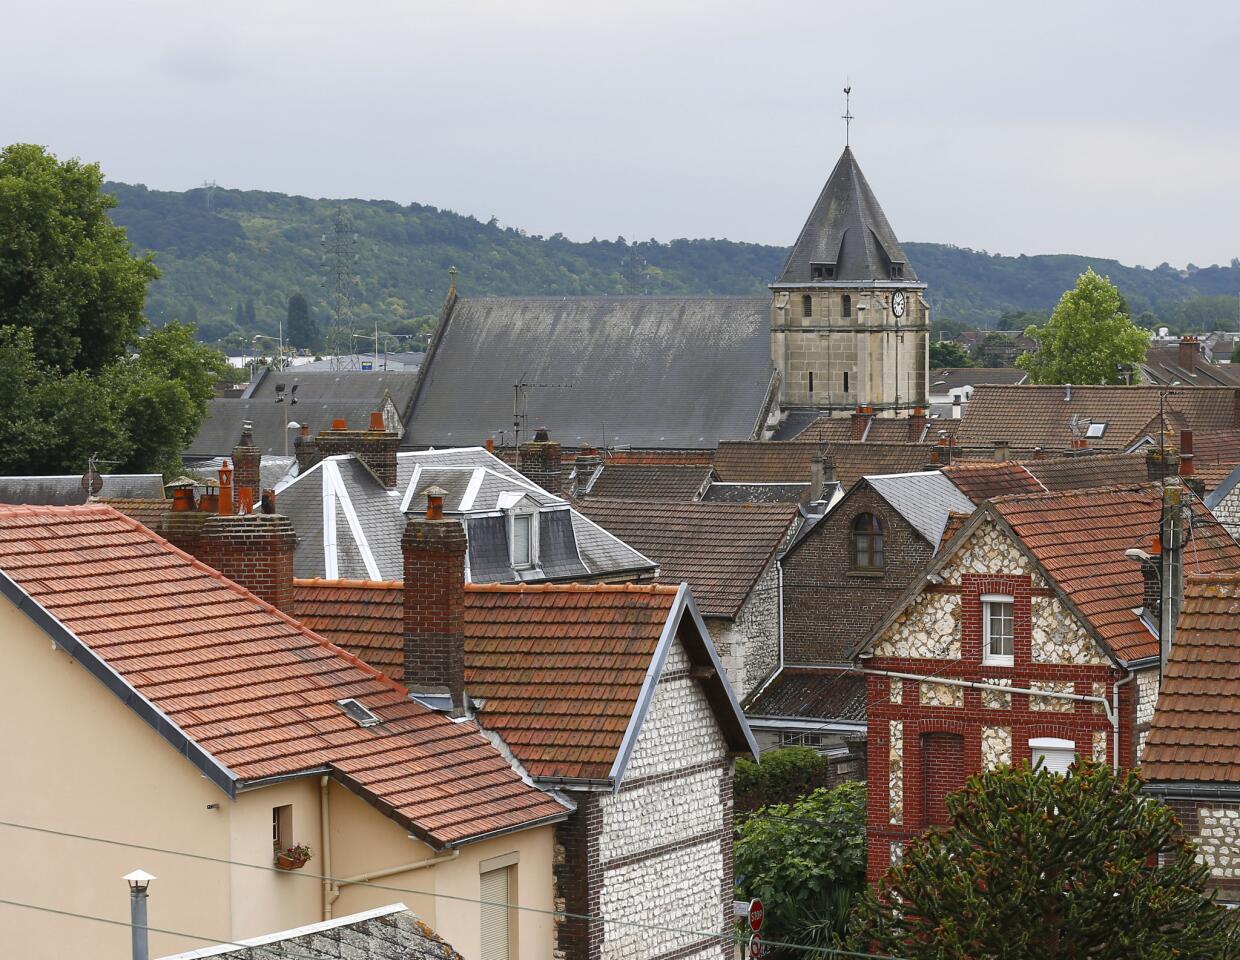 Attackers with knives kill priest in northern France